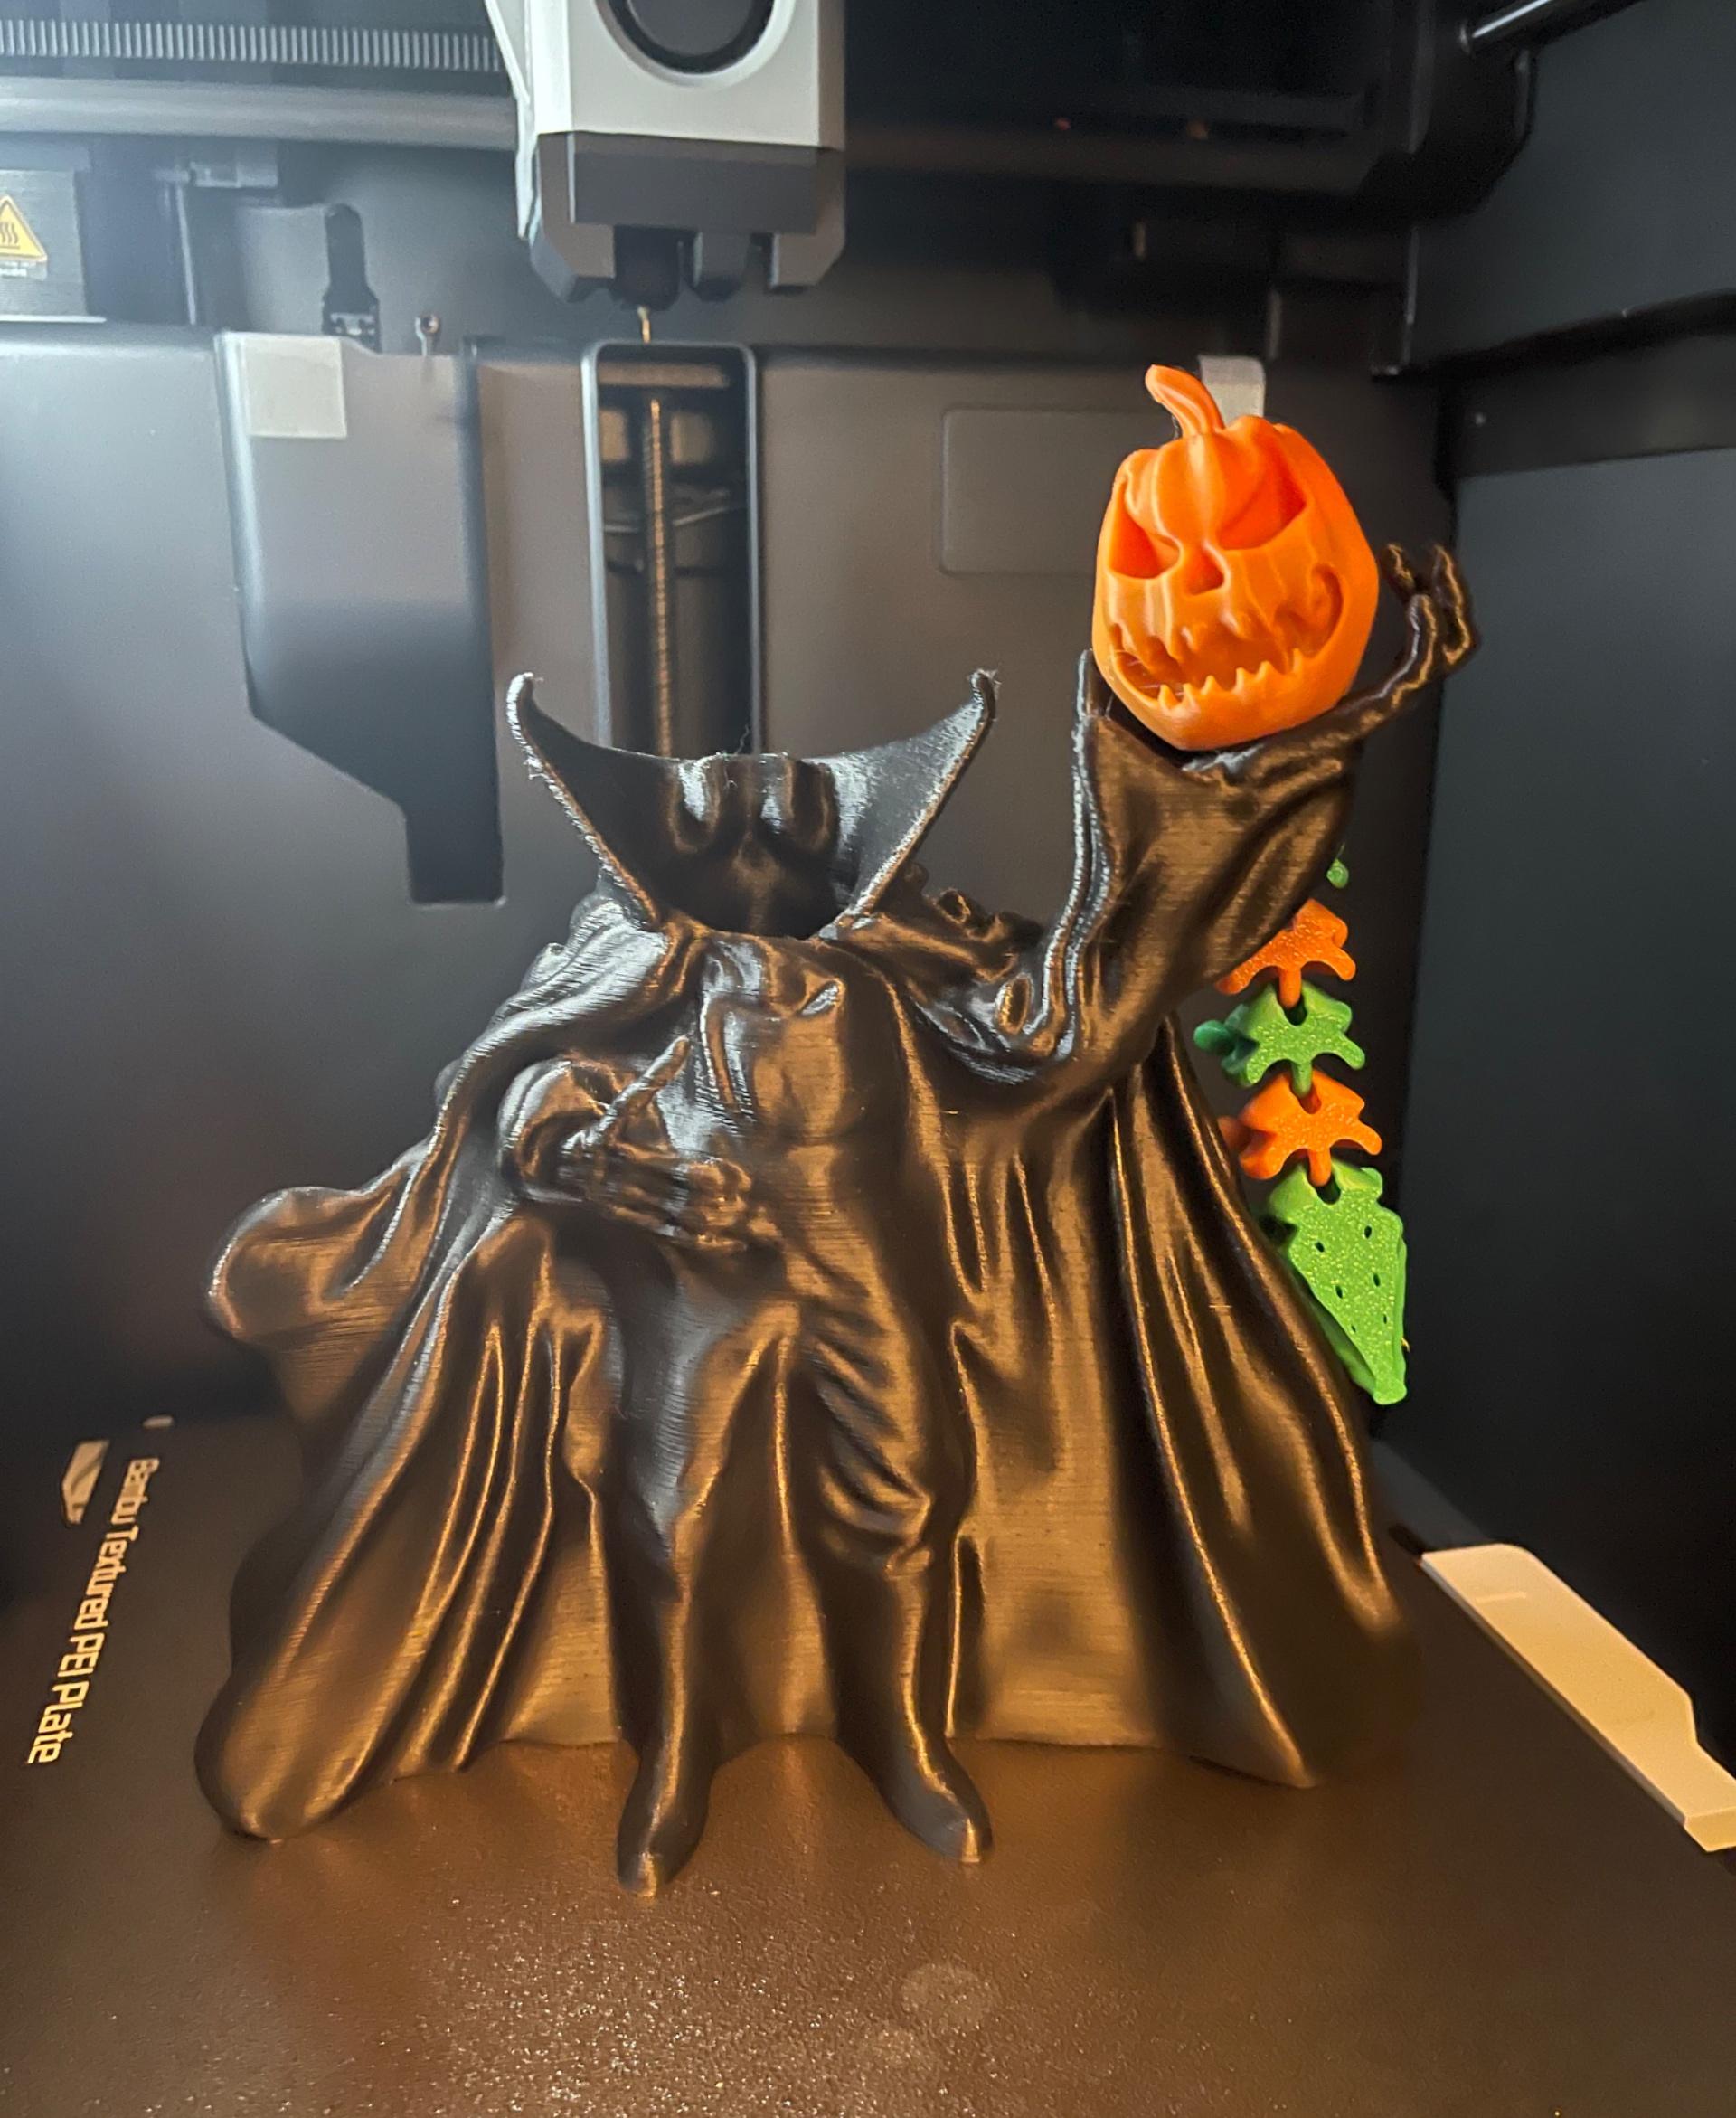 Headless Horseman   - Finally had an excuse to use the sample colors from my p1s - 3d model